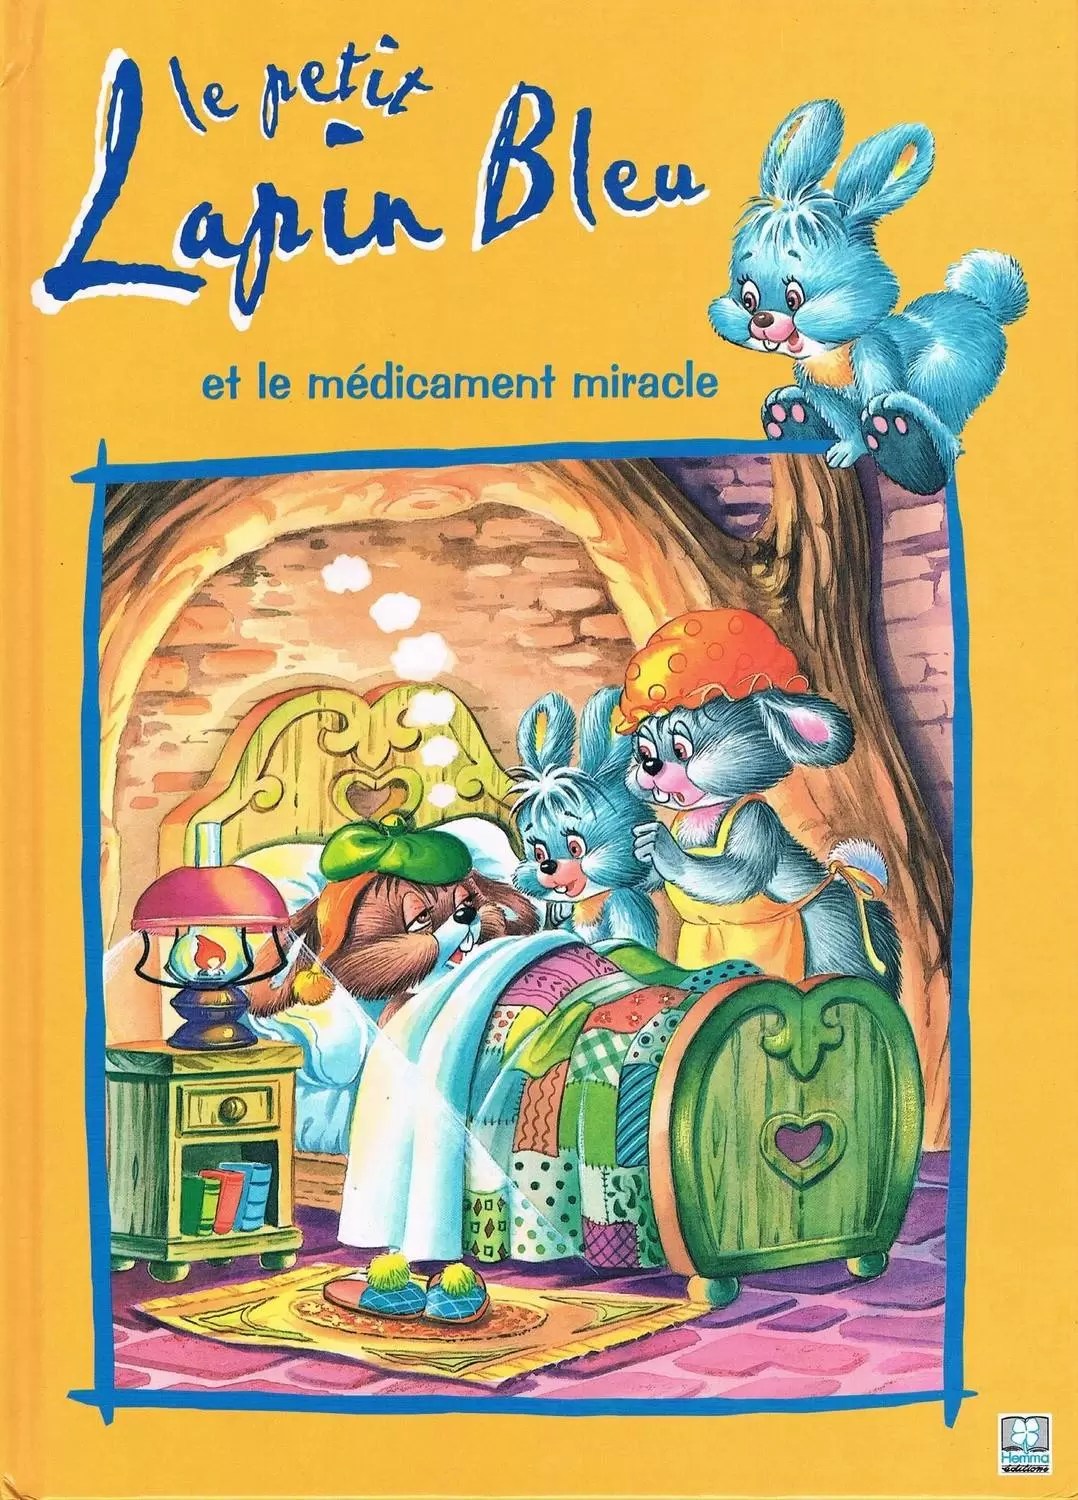 Le Petit Lapin Bleu - Le petit lapin bleu et le médicament miracle